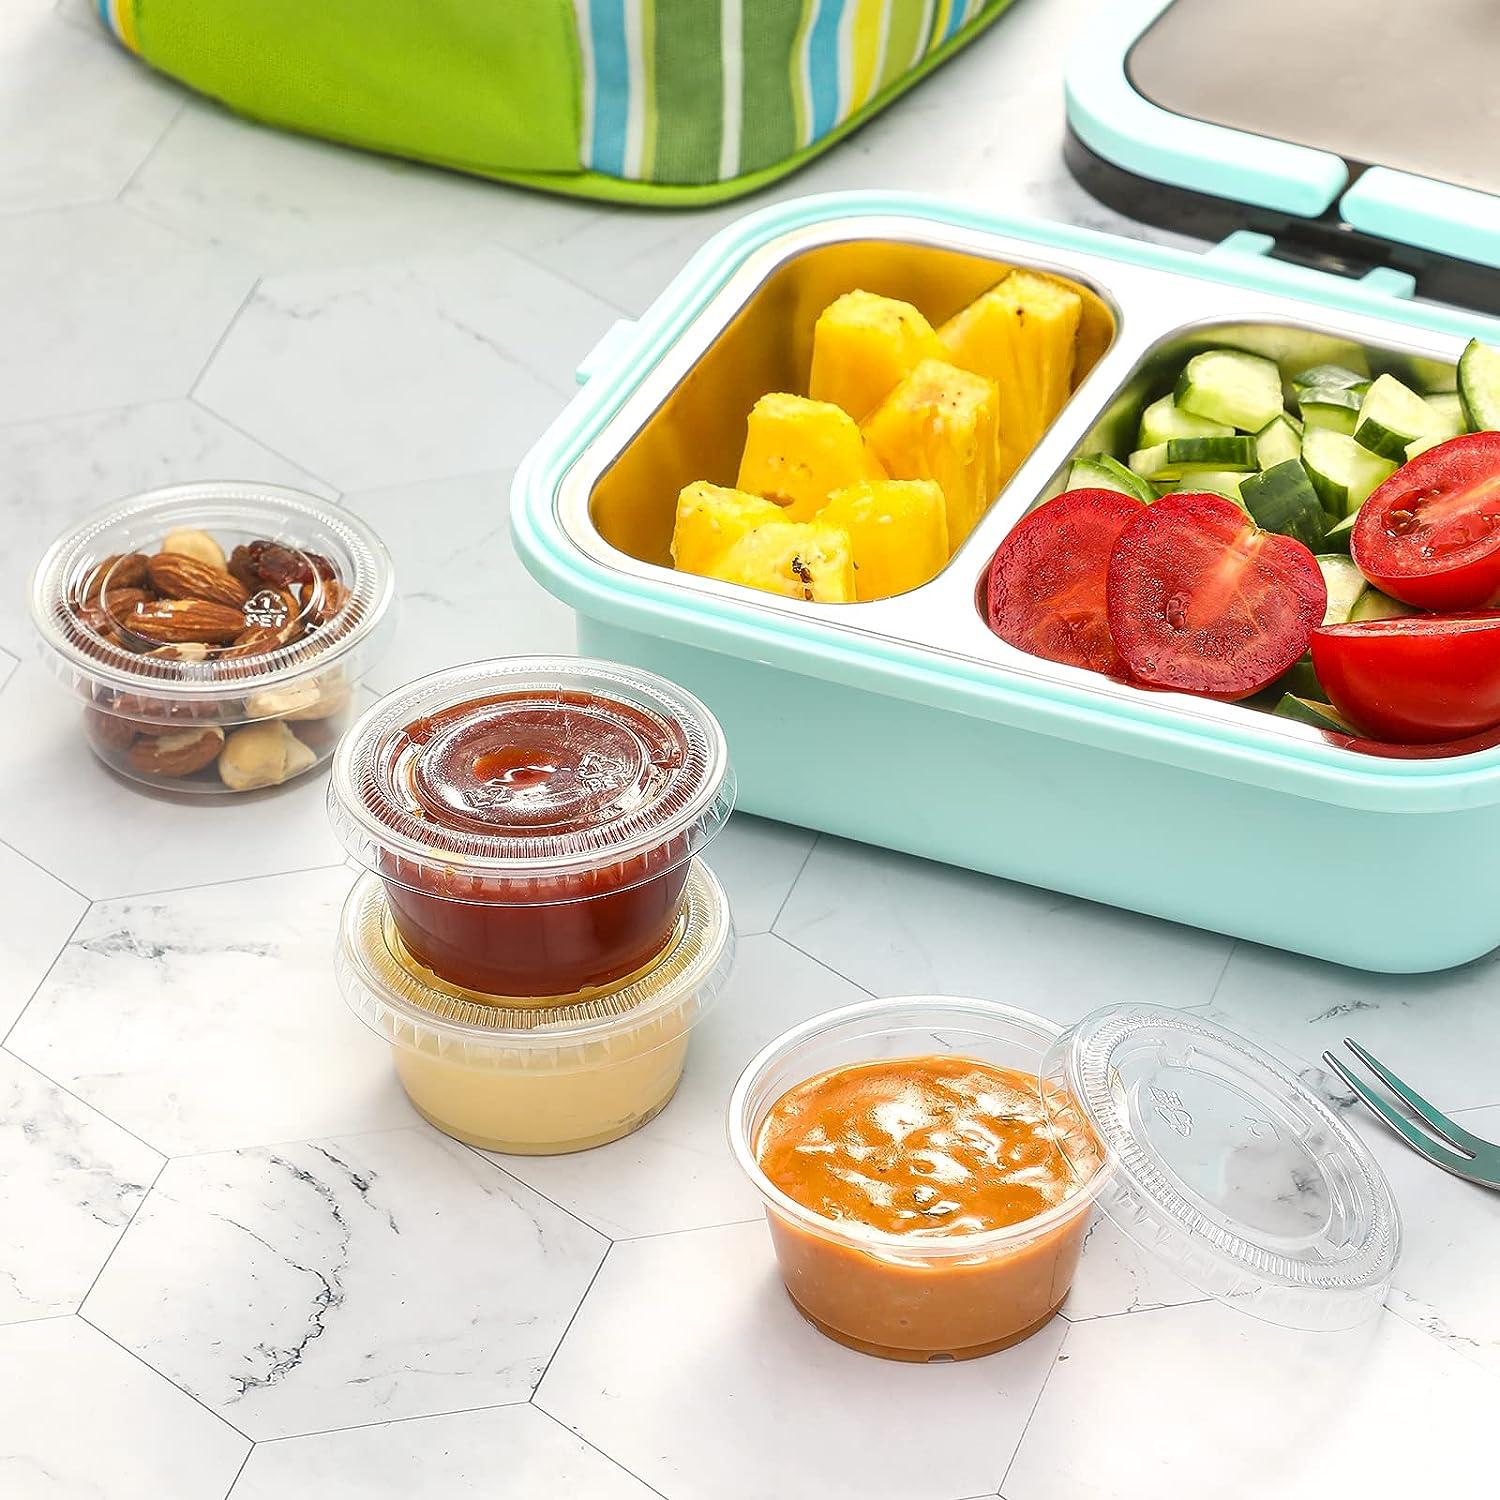 Salad Dressing Container to Go Small Food Storage Containers with